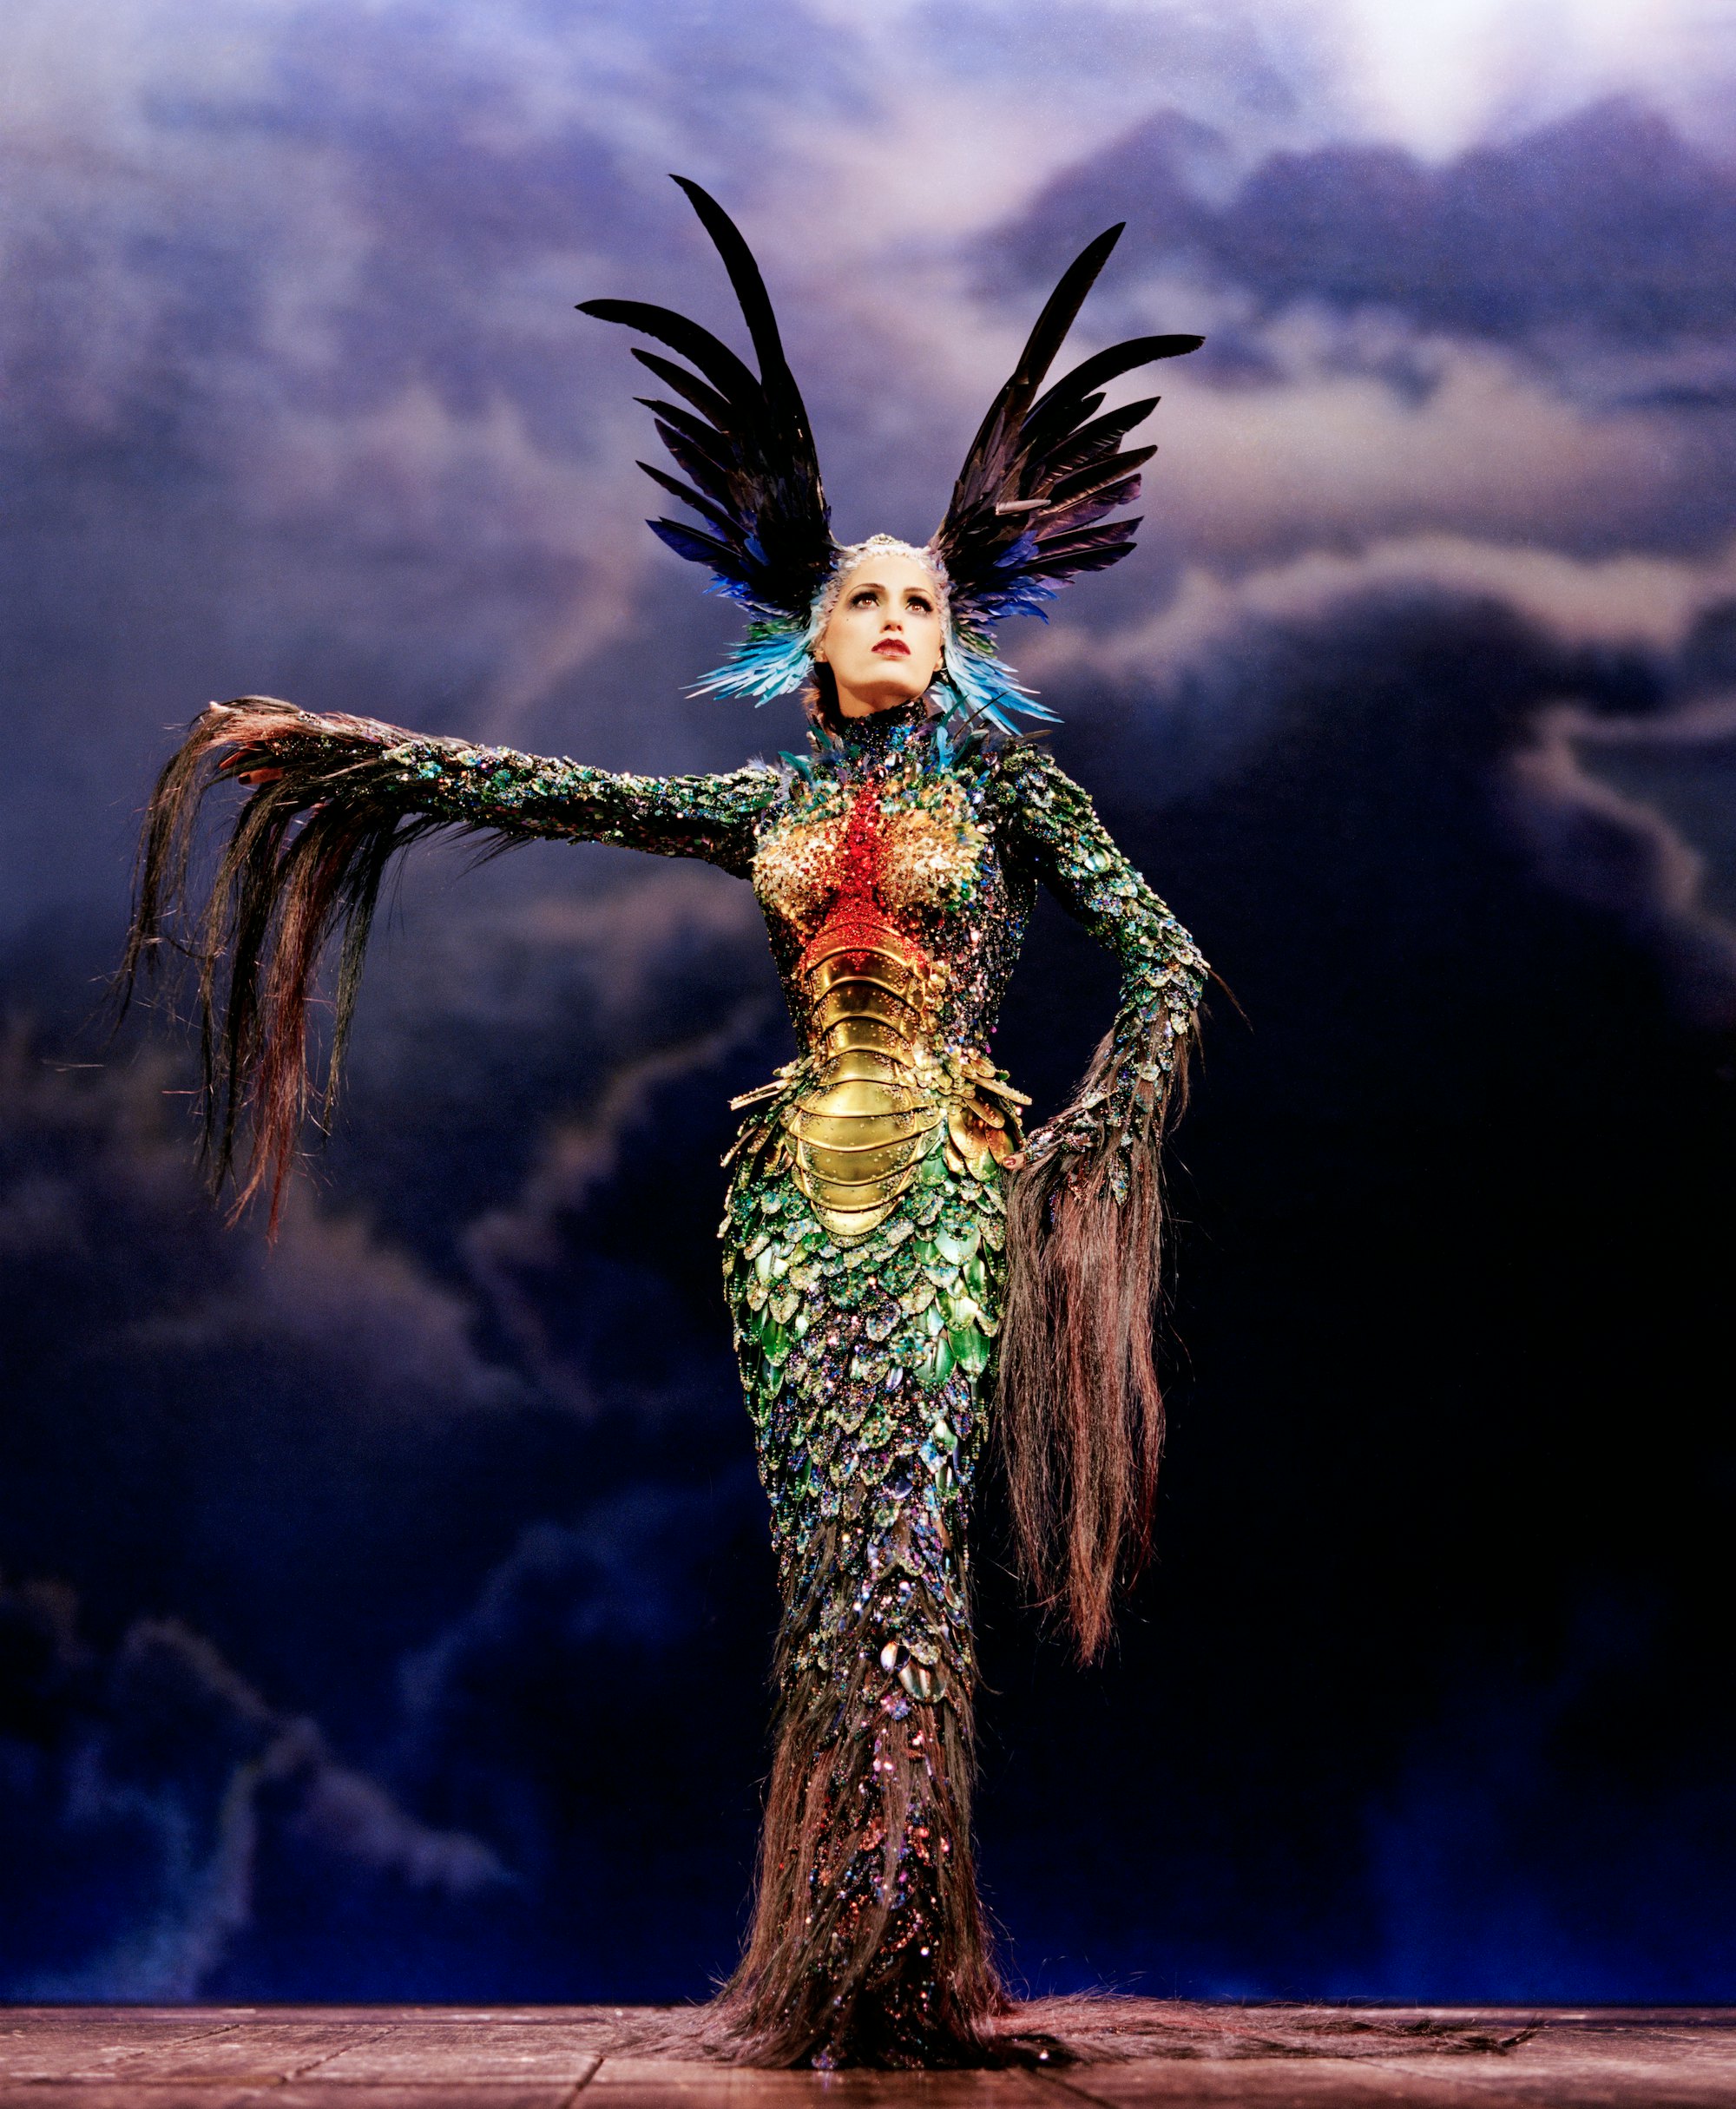 Thierry Mugler's Extravagant, Otherworldly Legacy Lives On